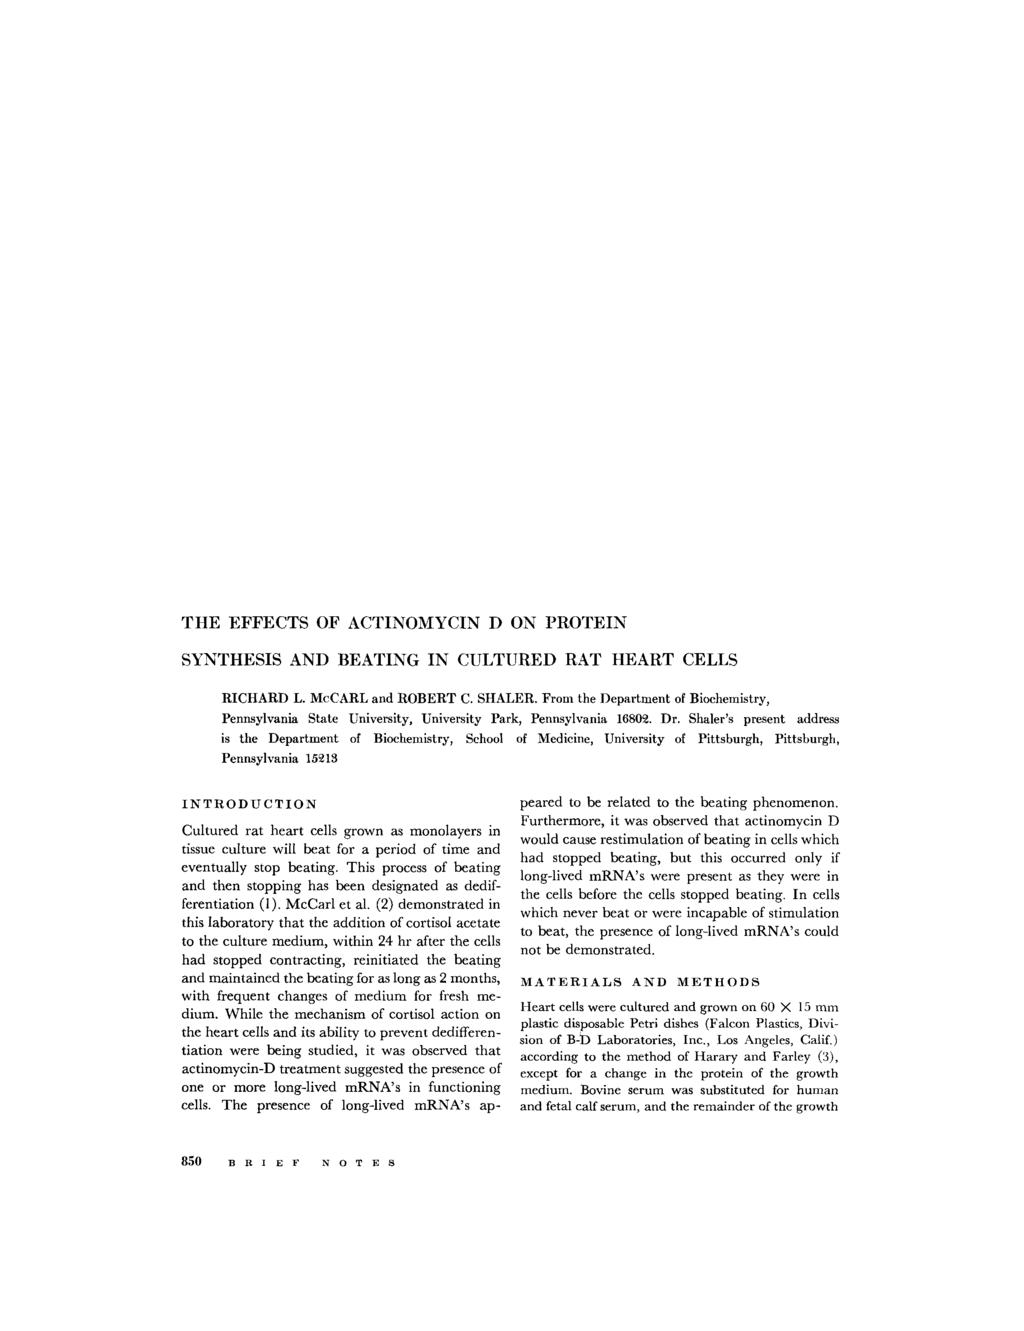 Published Online: 1 March, 1969 Supp Info: http://doi.org/10.1083/jcb.40.3.850 Downloaded from jcb.rupress.